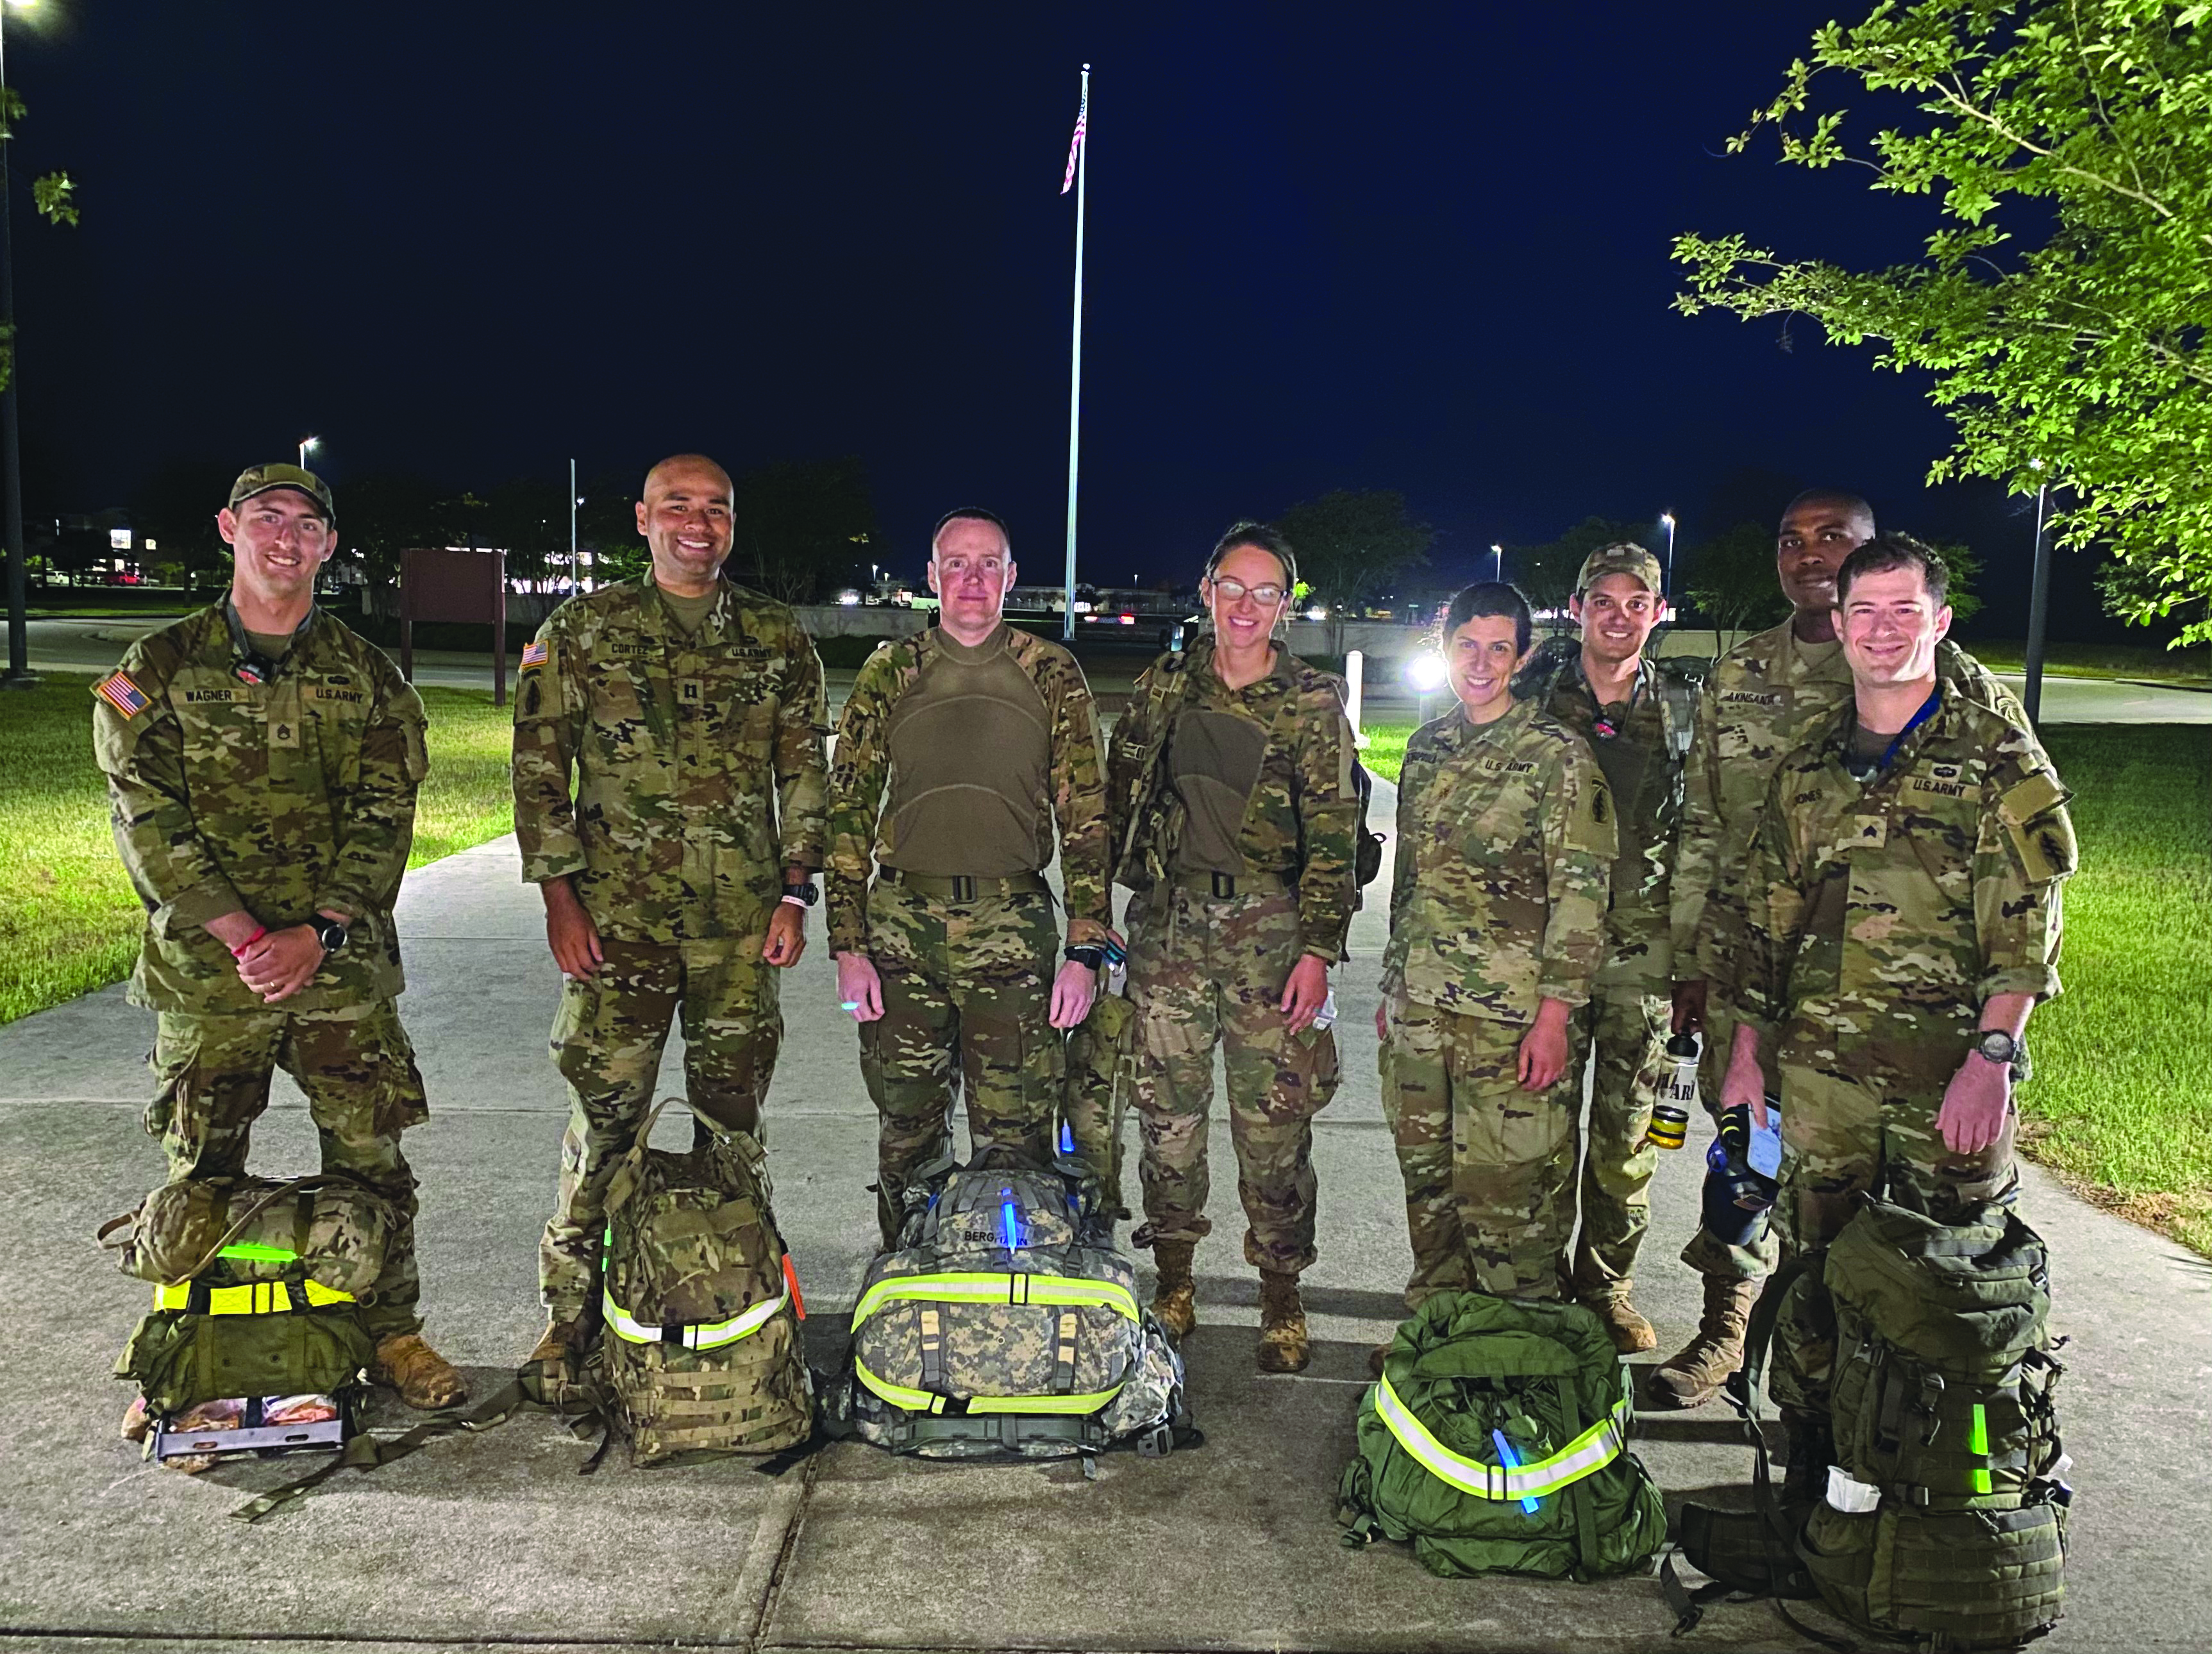 On 6 May 2021, between 0030 and 0500, members of the 7th Special Forces Group (Airborne) legal team successfully completed the 18.6-mile Norwegian Foot March at Camp “Bull” Simons, Eglin Air Force Base, Florida. Despite high humidity and miles of thick mud due to recent storms, the Red Empire’s judge advocates and paralegals lived the 7th SFG(A) motto of “Lo Que Sea, Cuando Sea, Donde Sea” (“Anything, Anytime, Anywhere”) and finished well under the required 4.5-hour limit. Pictured from left to right are an exhausted SSG Harry Wagner, CPT Ellis Cortez, MAJ Brandon Bergmann, CPT Christina Johnson, MAJ Atina Stavropoulos, SGT(P) Andrew Pena, CPT Tolulope Akinsanya, and SGT Nathan Jones.